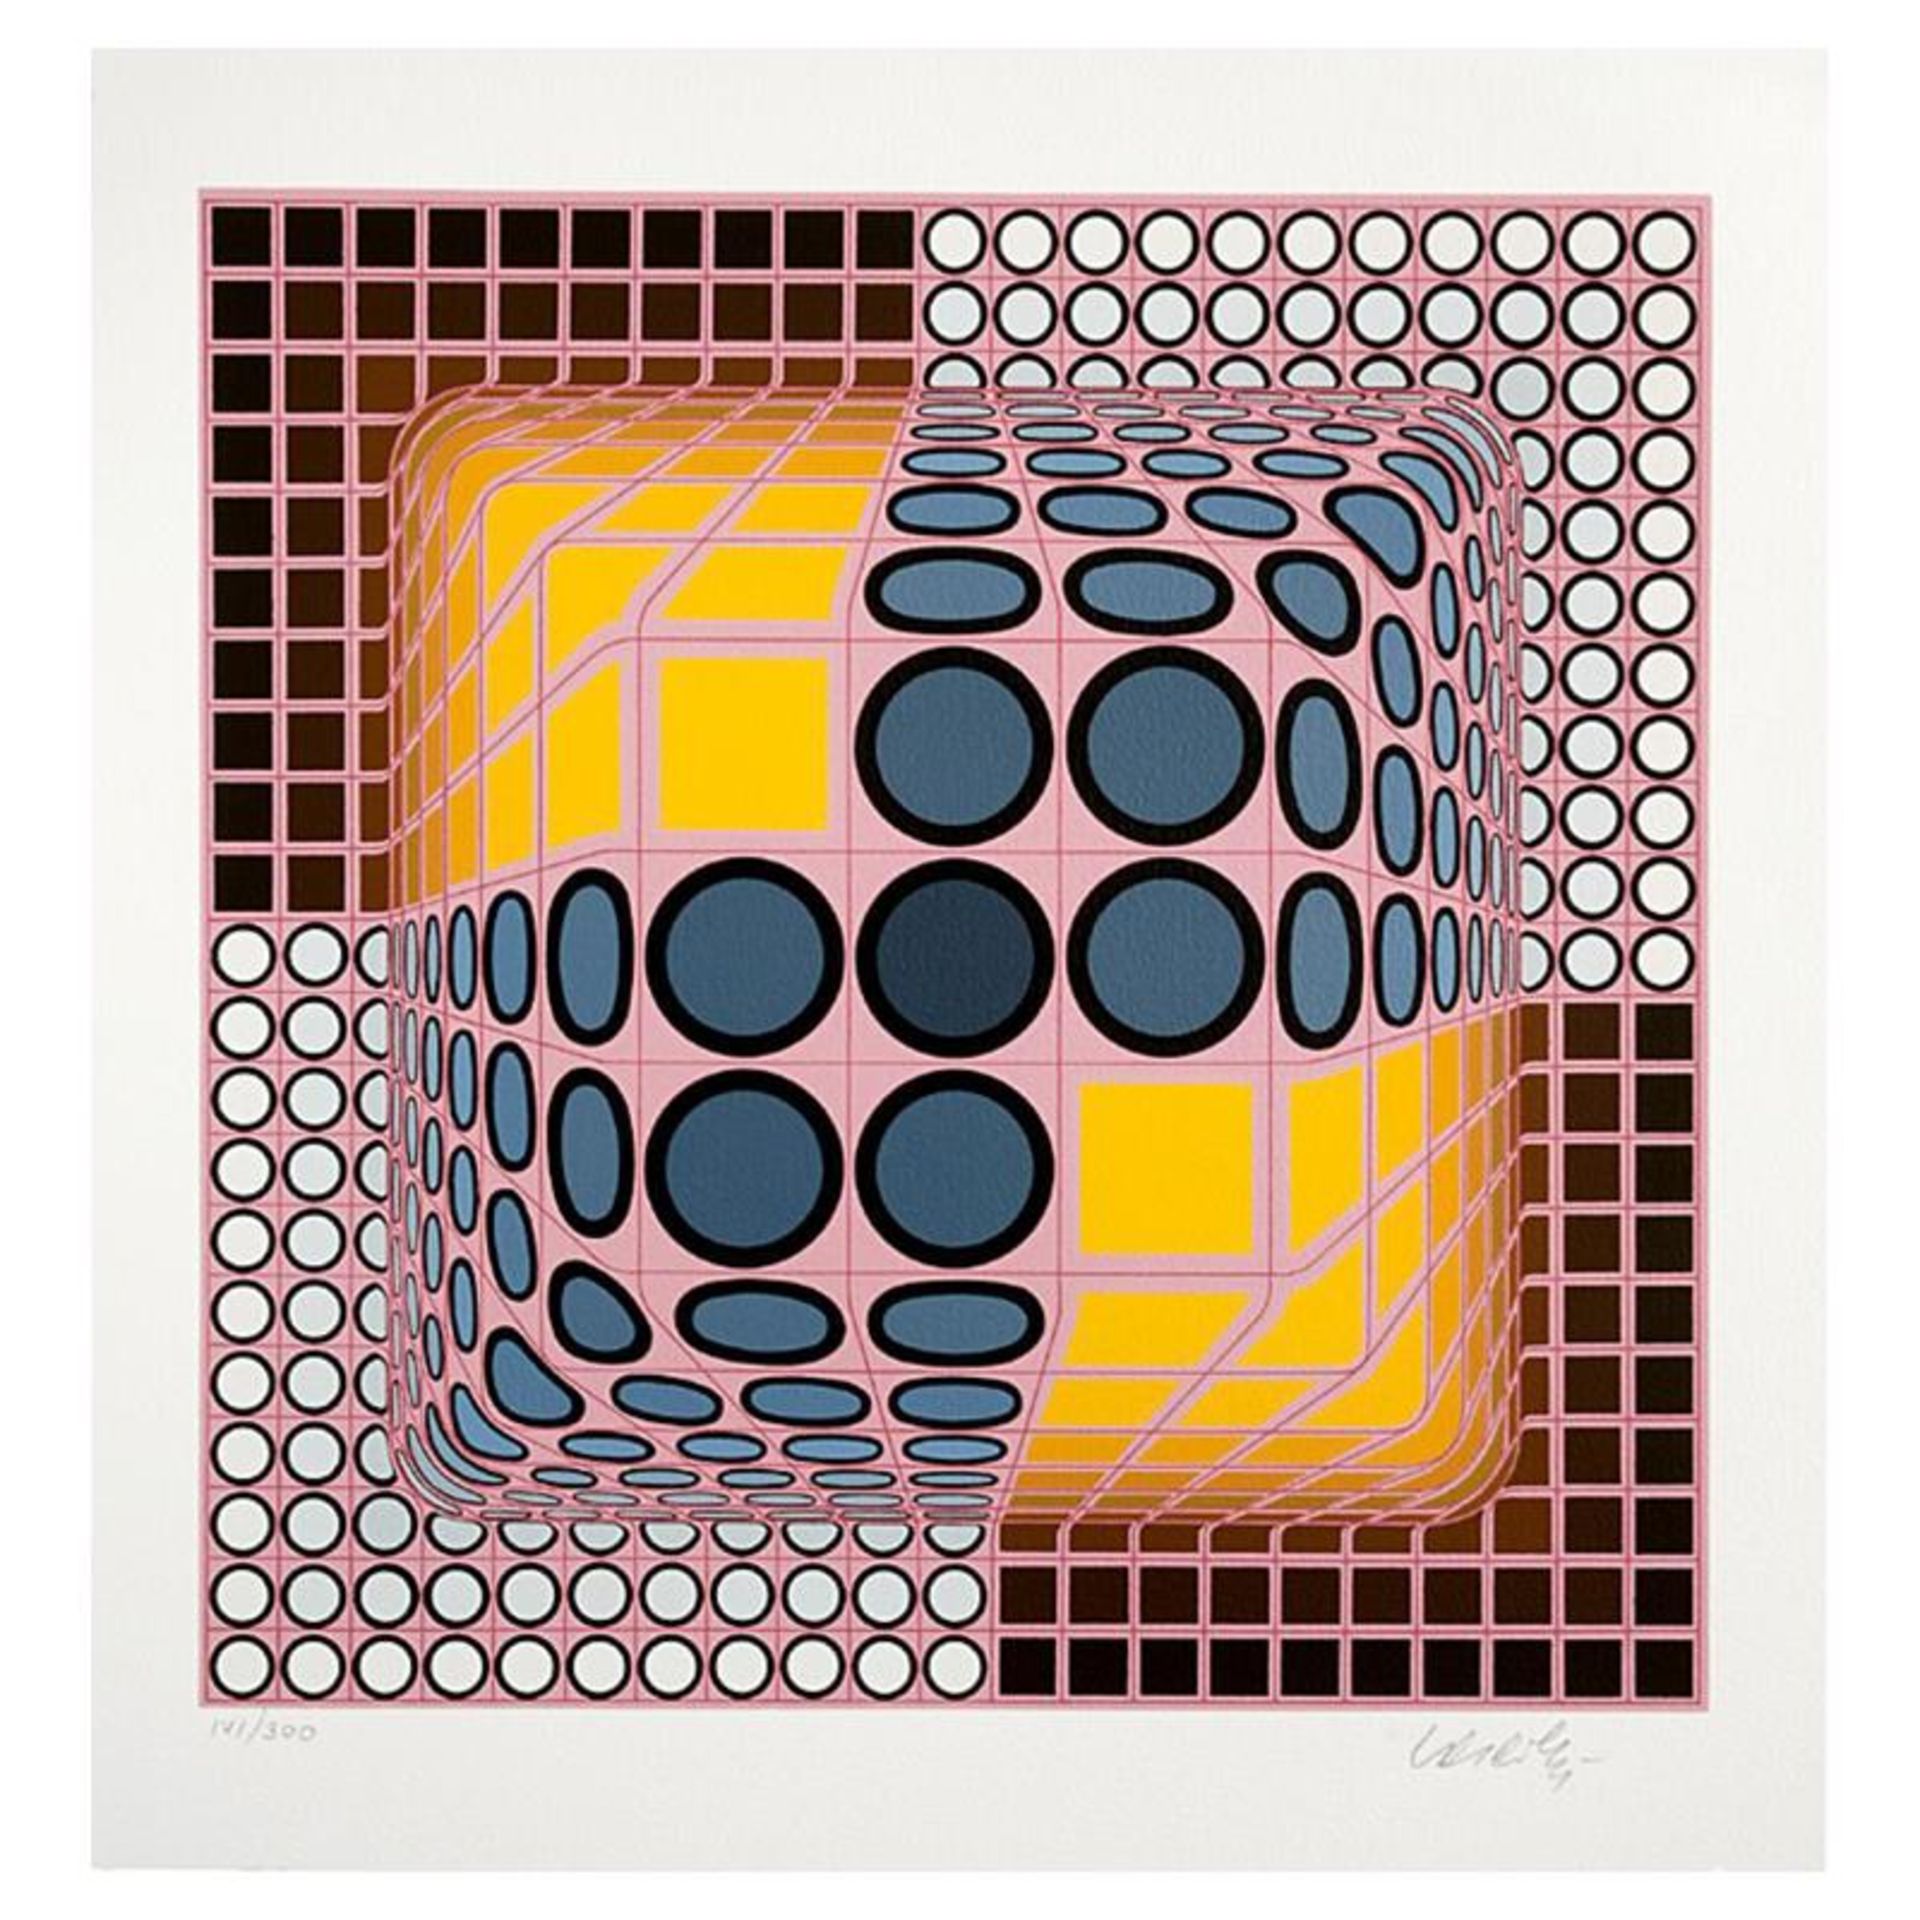 Victor Vasarely (1908-1997), "Pink Composition" Hand Signed Limited Edition Seri